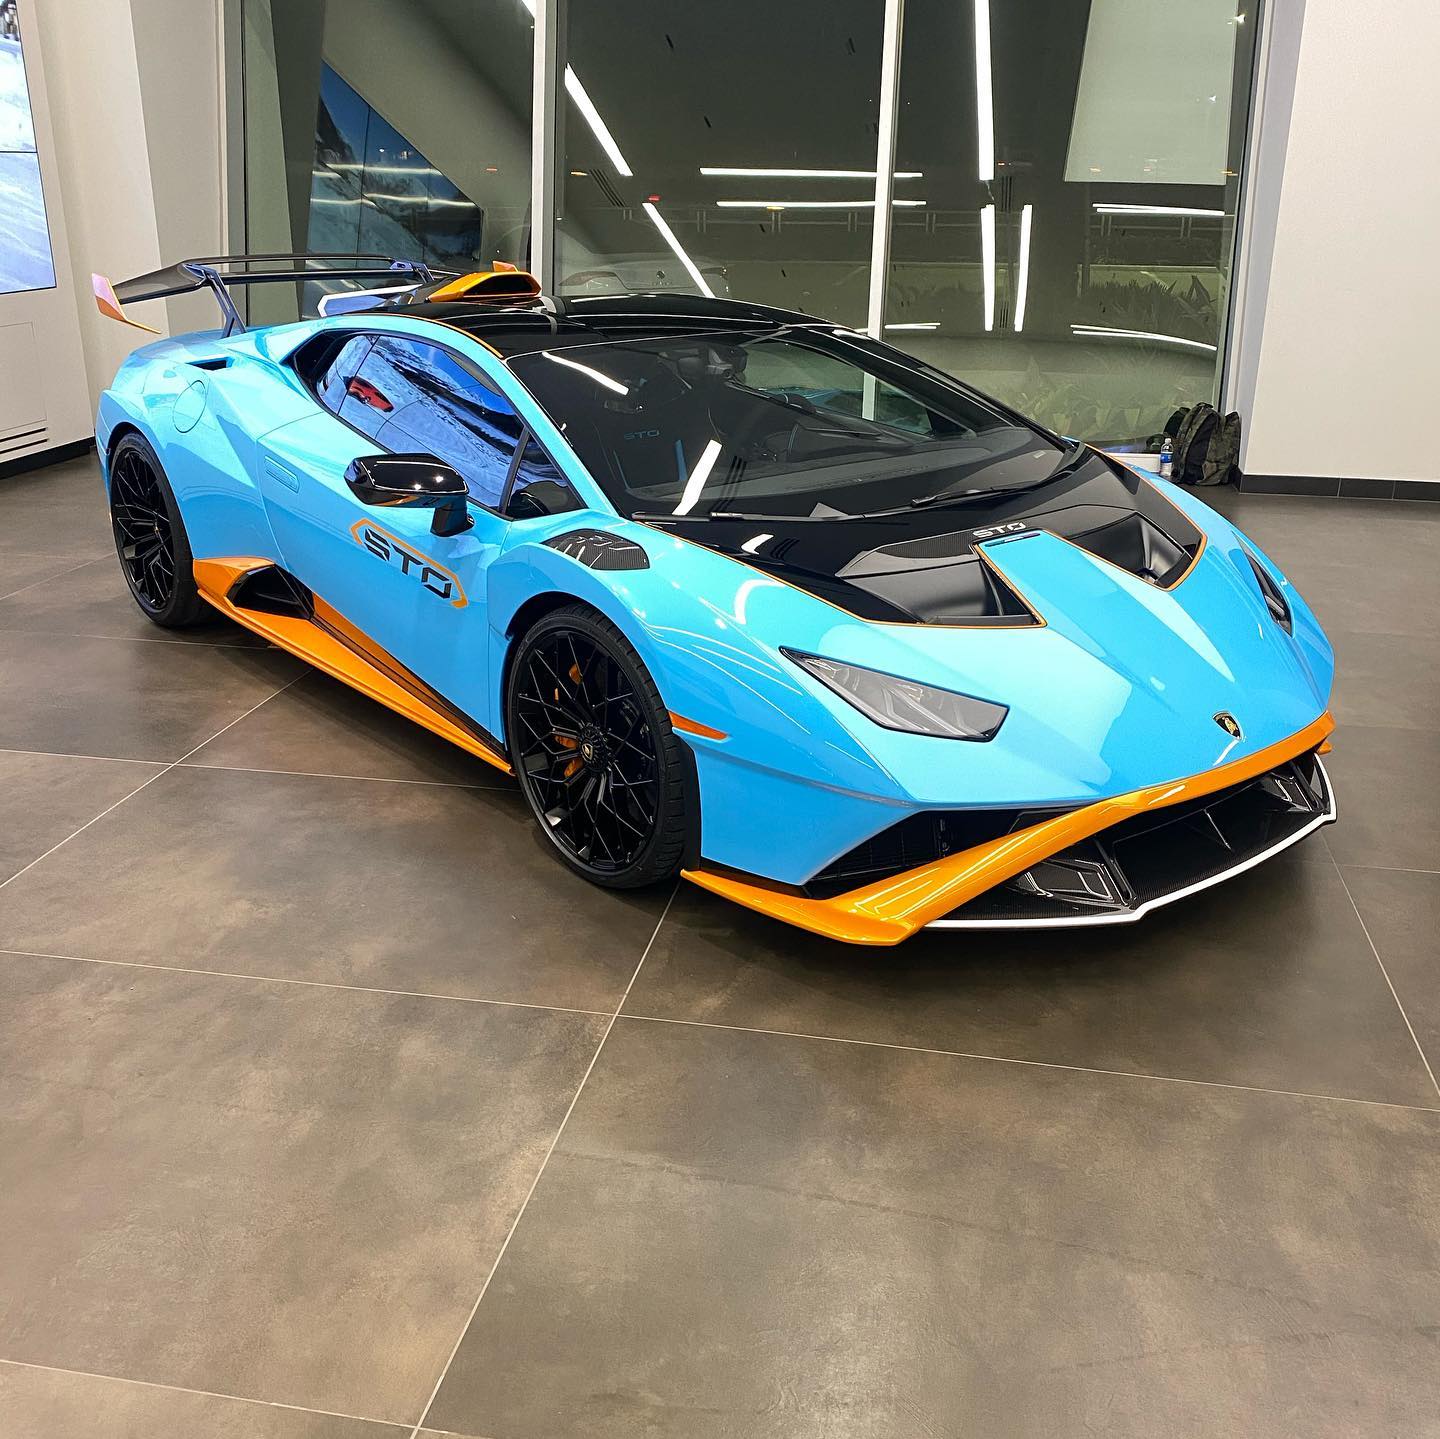 New Huracan STO on Display in Orlando